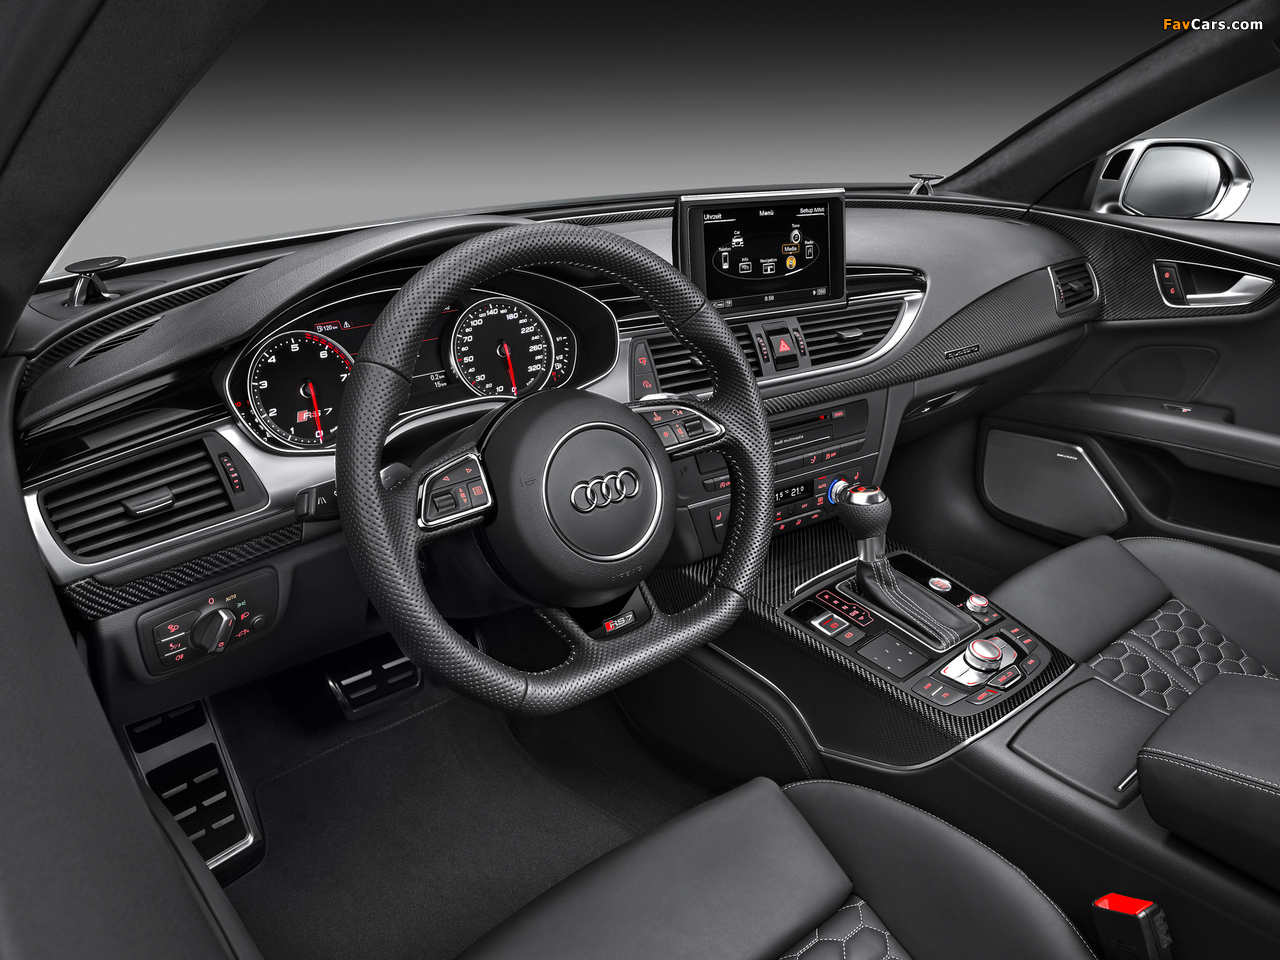 Images of Audi RS7 Sportback 2013 (1280 x 960)